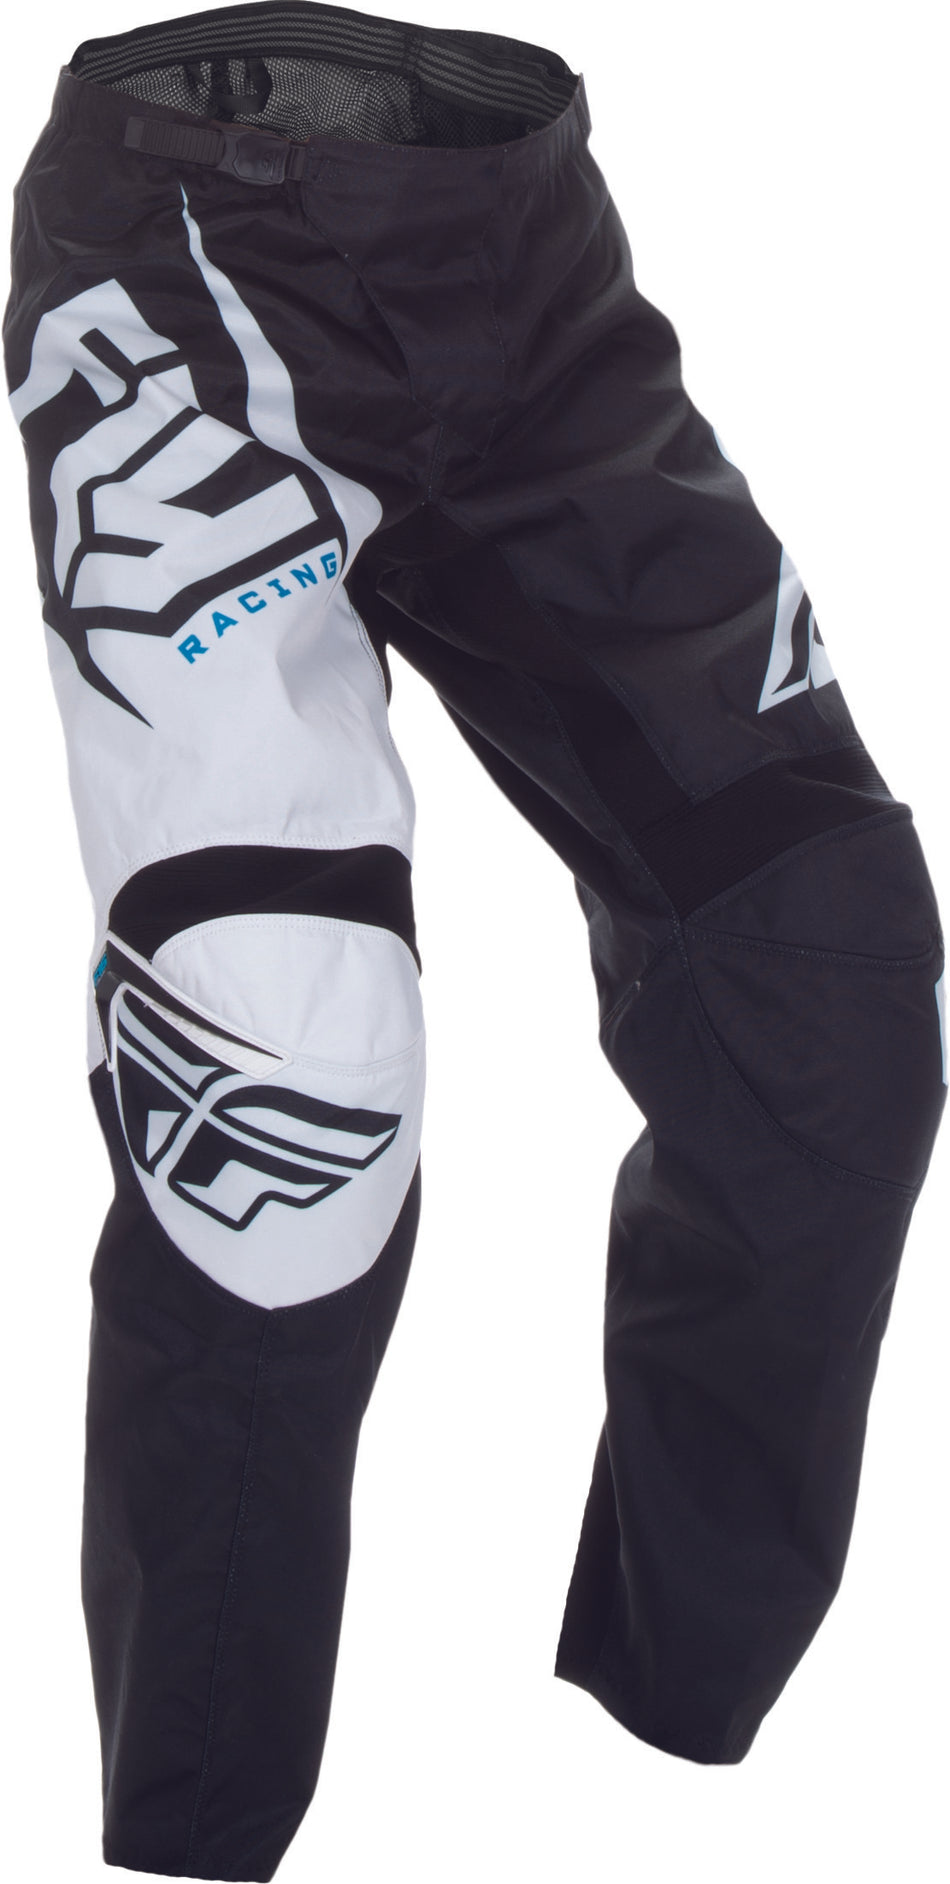 FLY RACING F-16 Pant Black/White Sz 28s 370-93028S